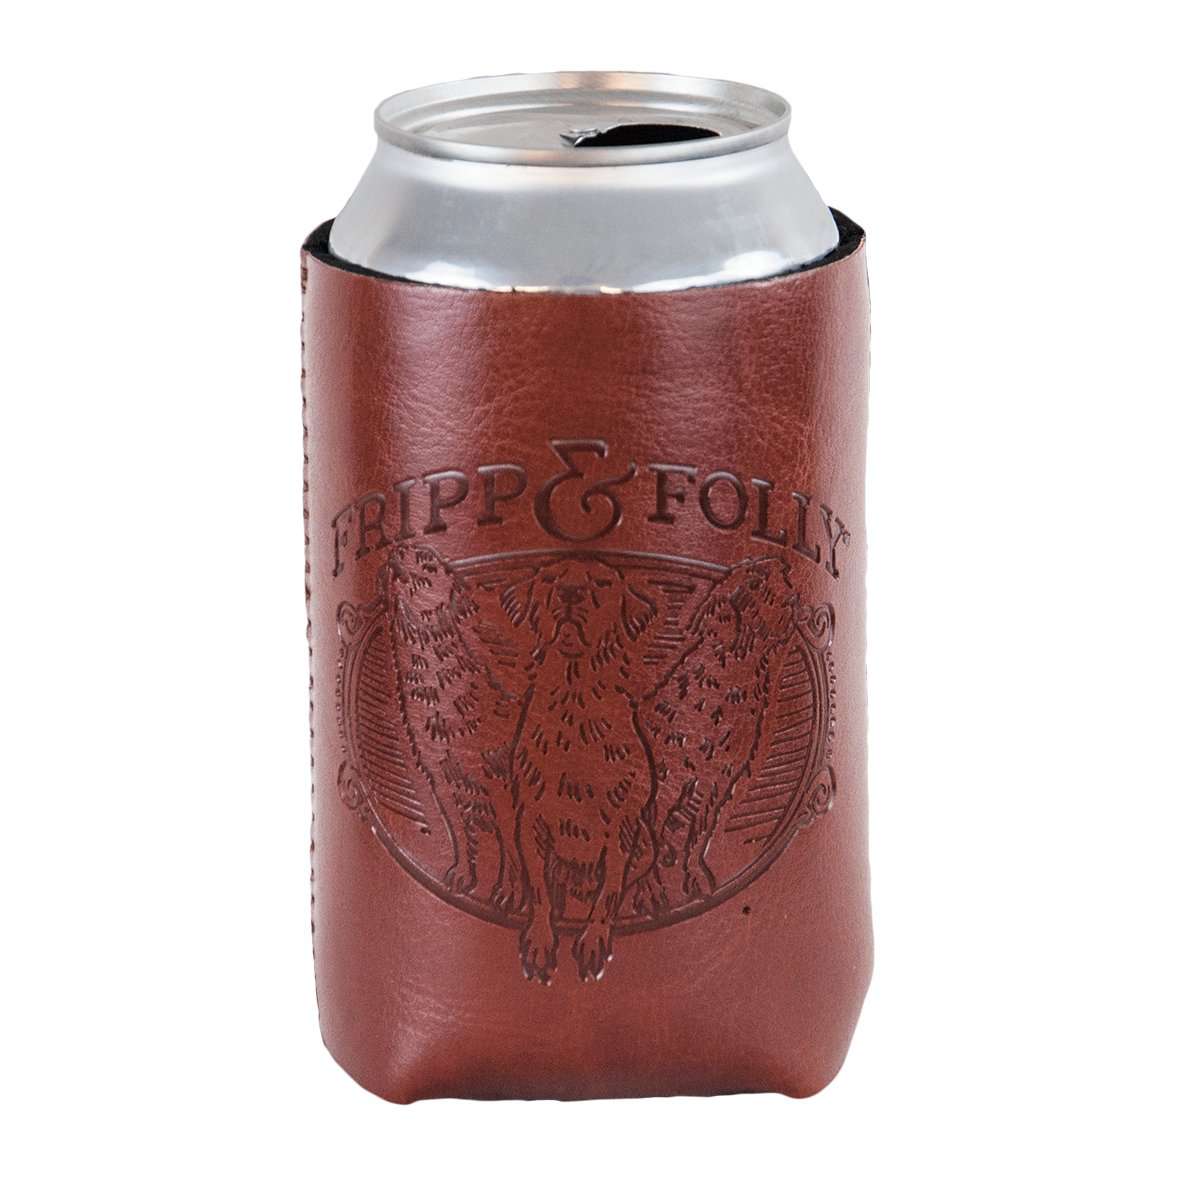 Three Dogs "Vegan" Leather/Neoprene Can Holder by Fripp & Folly - Country Club Prep